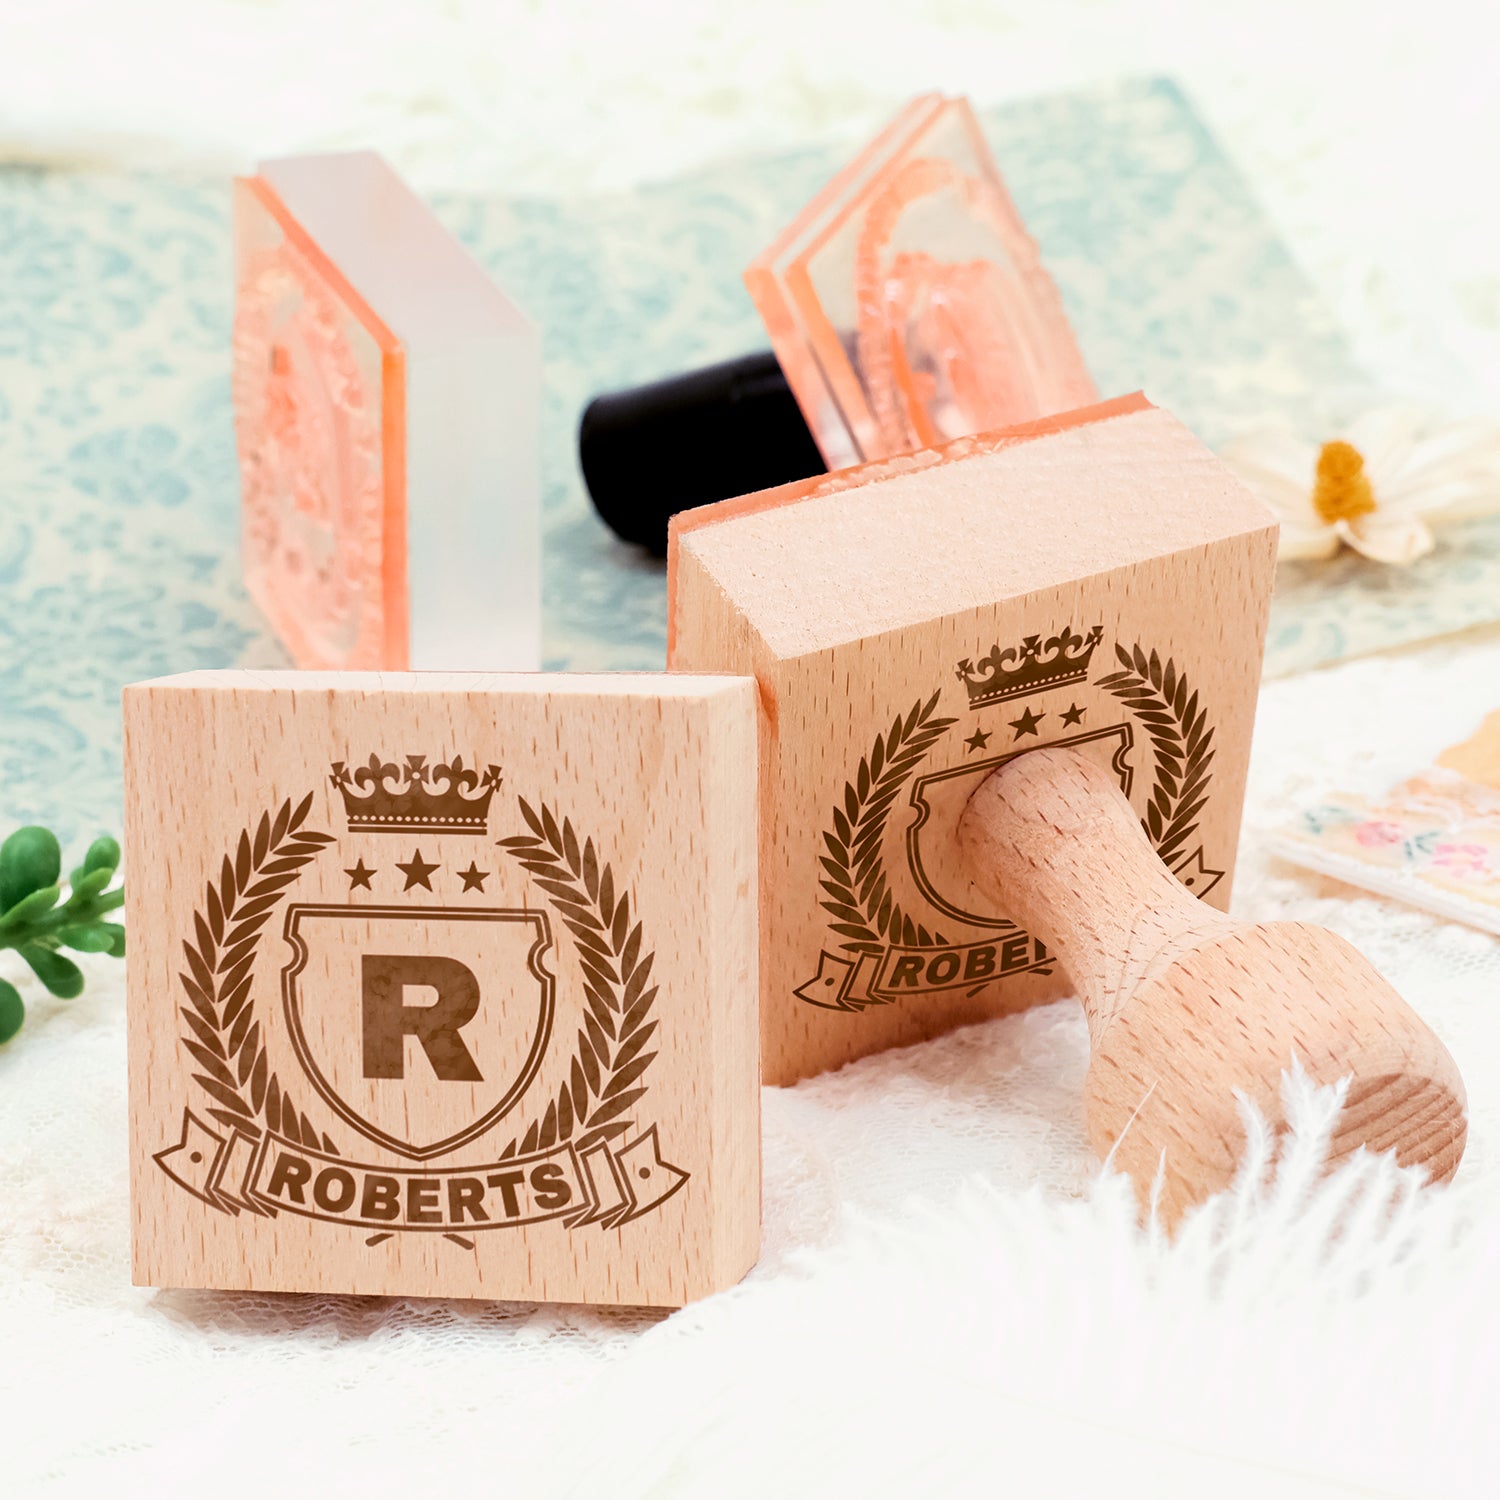 Rubber Stamps, Custom & Stock Stamps